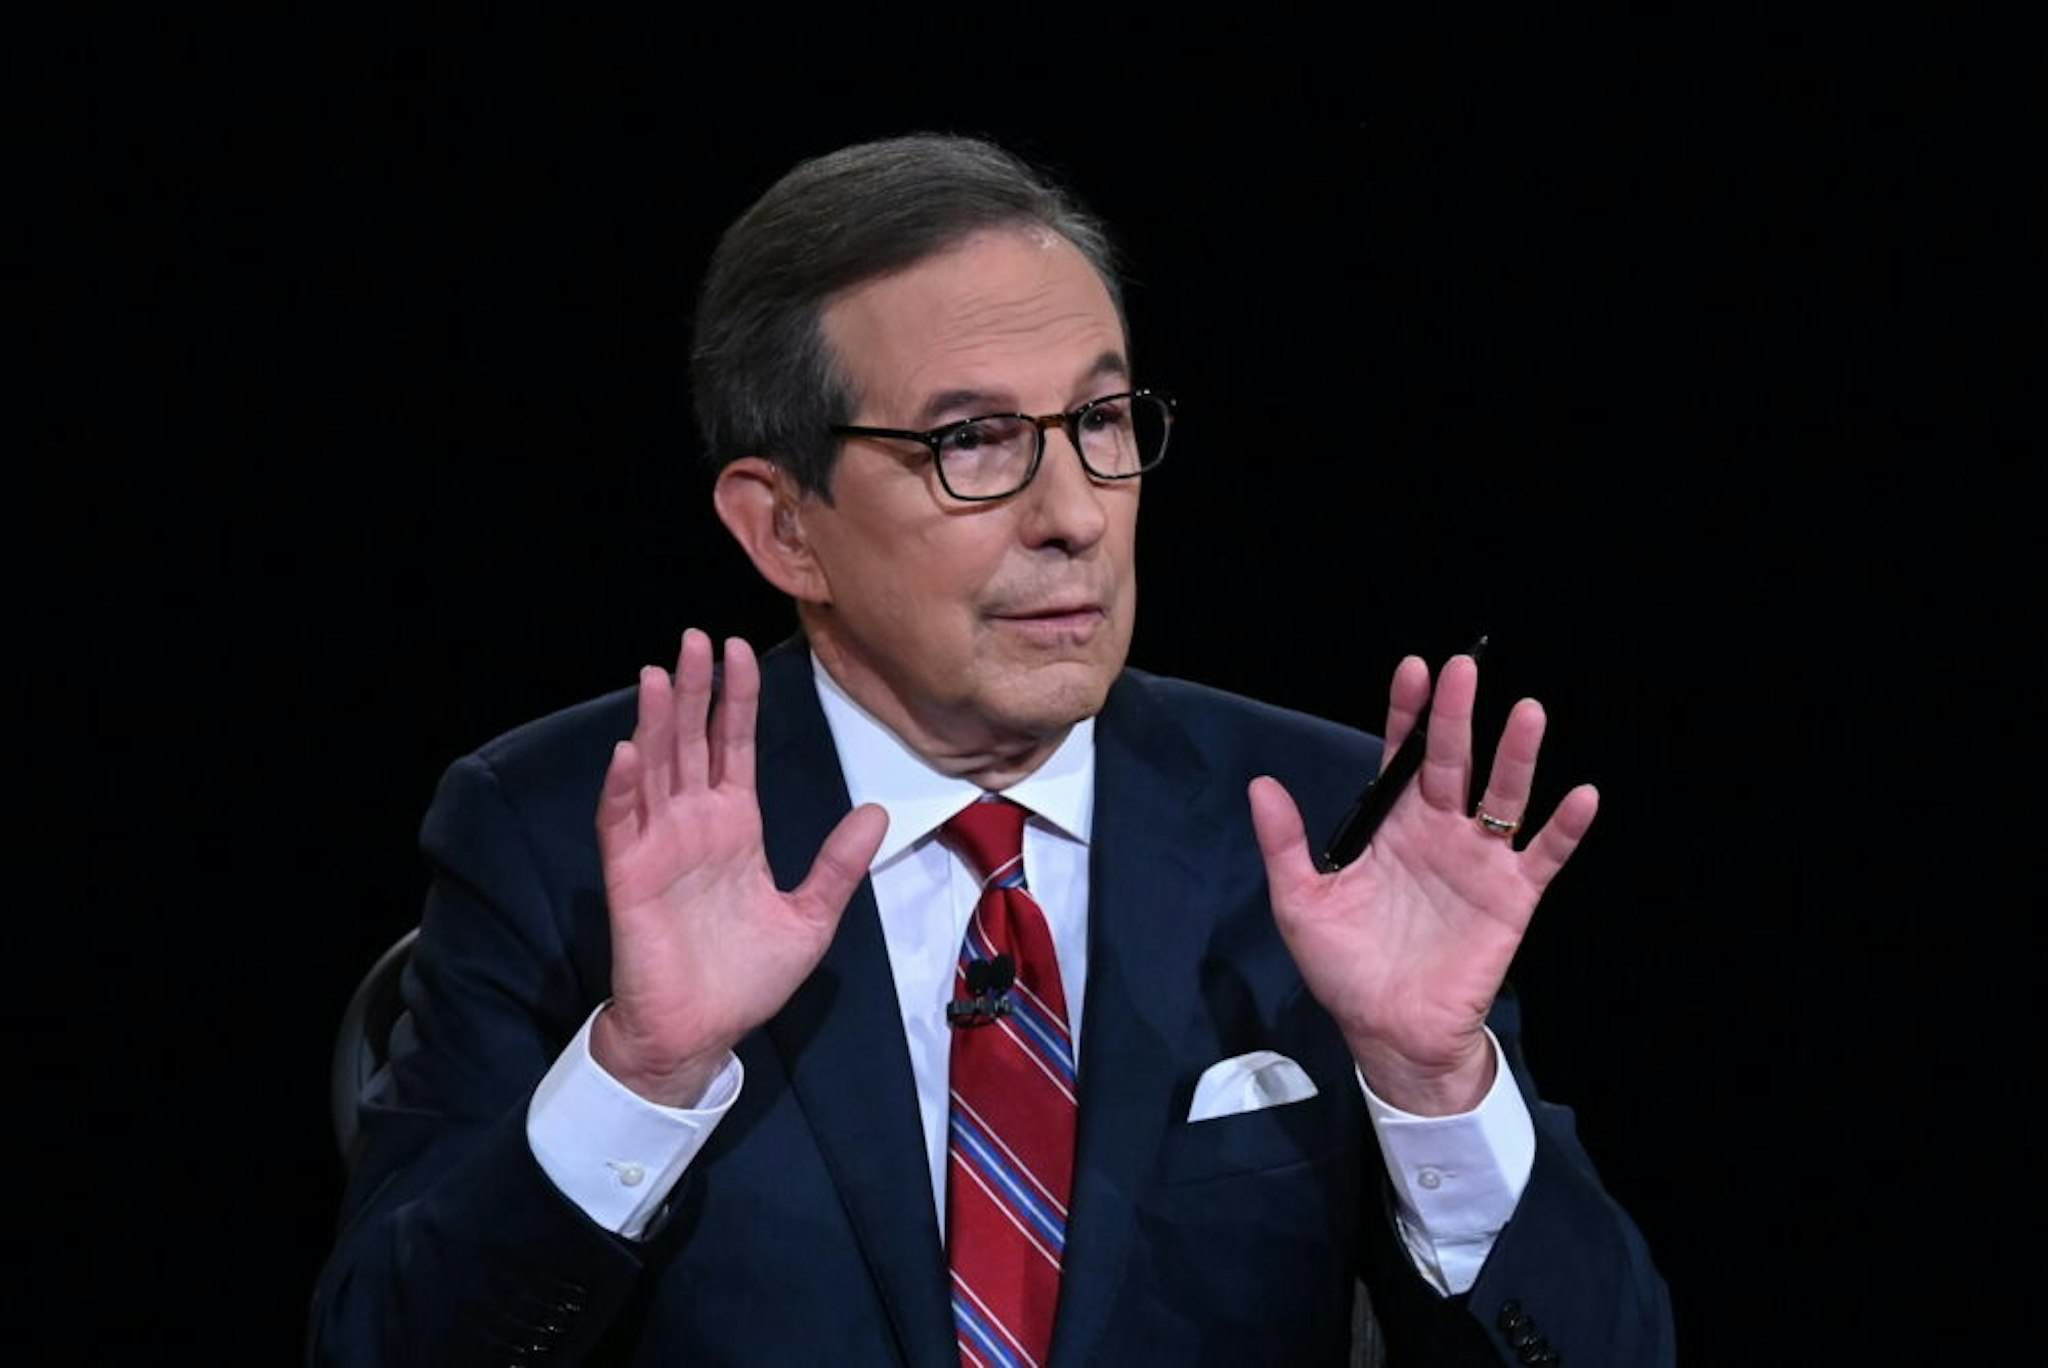 CLEVELAND, OHIO - SEPTEMBER 29: Debate moderator and Fox News anchor Chris Wallace directs the first presidential debate between U.S. President Donald Trump and Democratic presidential nominee Joe Biden at the Health Education Campus of Case Western Reserve University on September 29, 2020 in Cleveland, Ohio. This is the first of three planned debates between the two candidates in the lead up to the election on November 3.